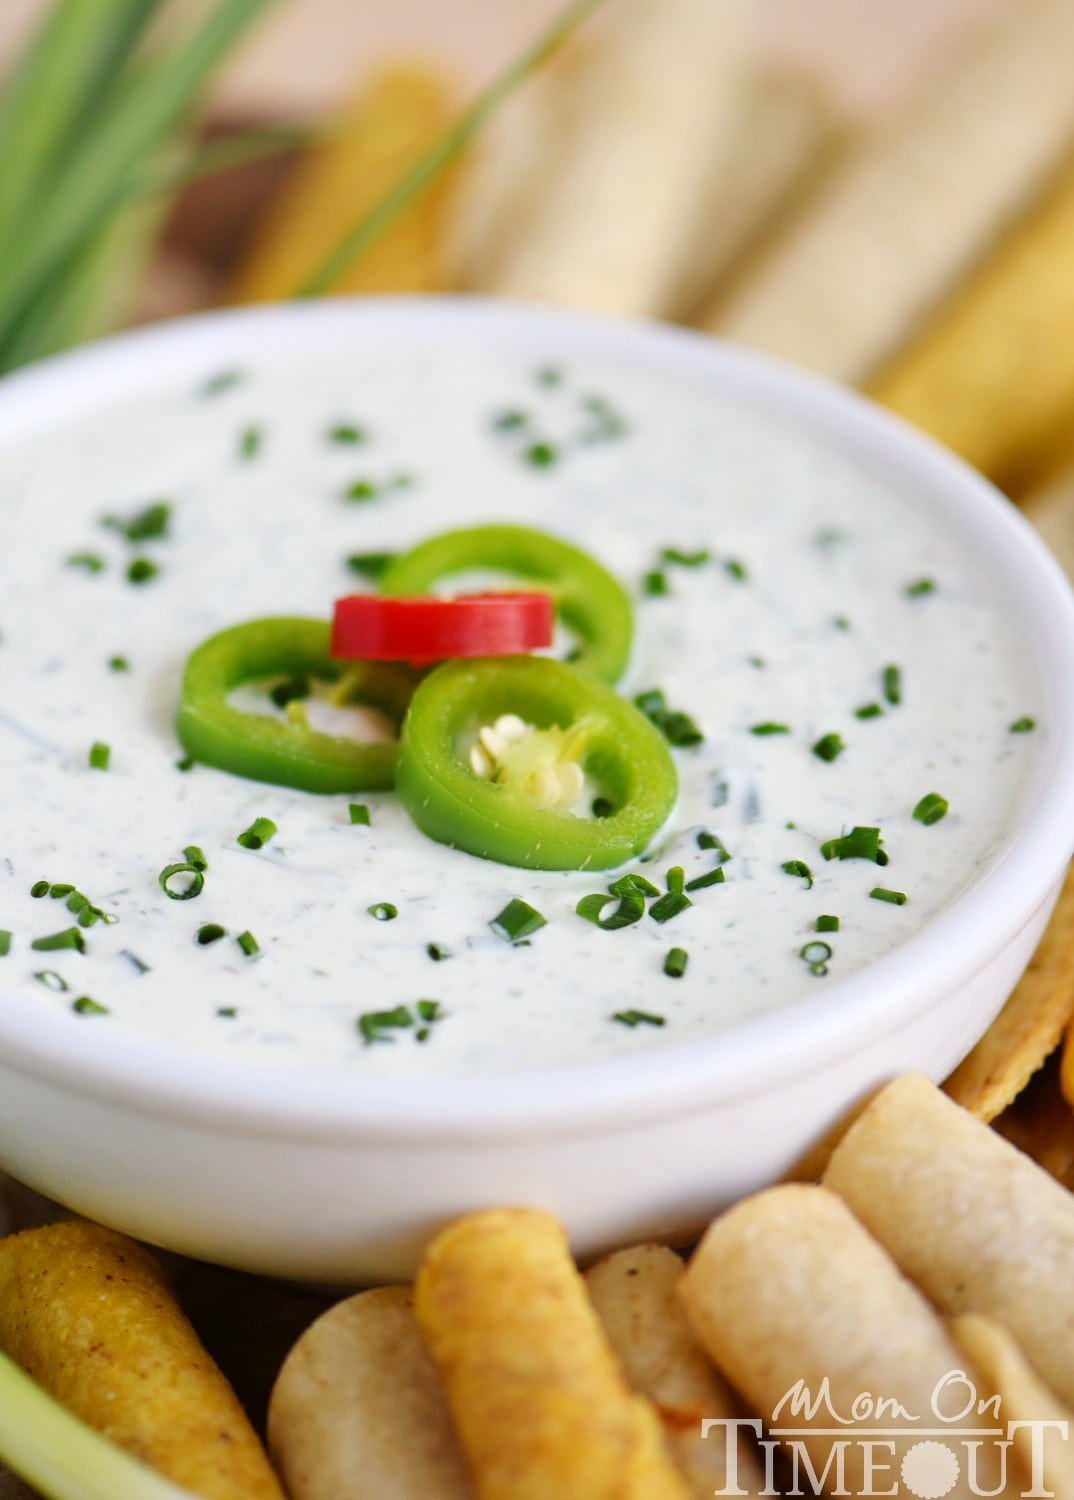 This easy Spicy Ranch Dip is made with Greek yogurt and lots of fresh ingredients for tremendous, bold flavor! Great for dipping all your favorite snacks! | Mom On Timeout